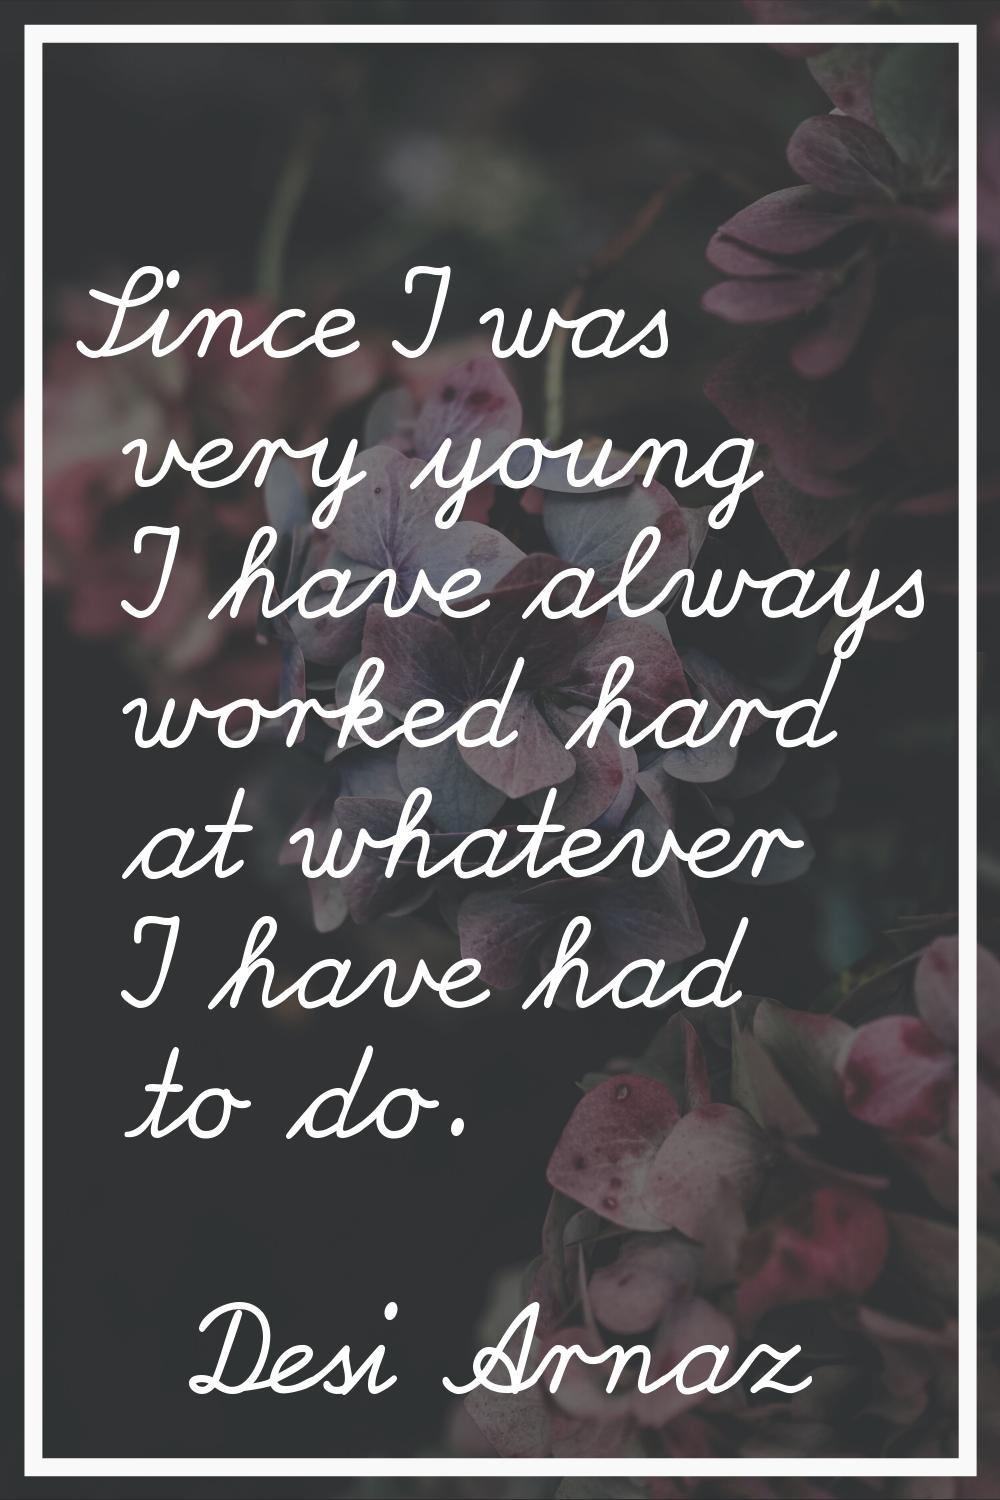 Since I was very young I have always worked hard at whatever I have had to do.